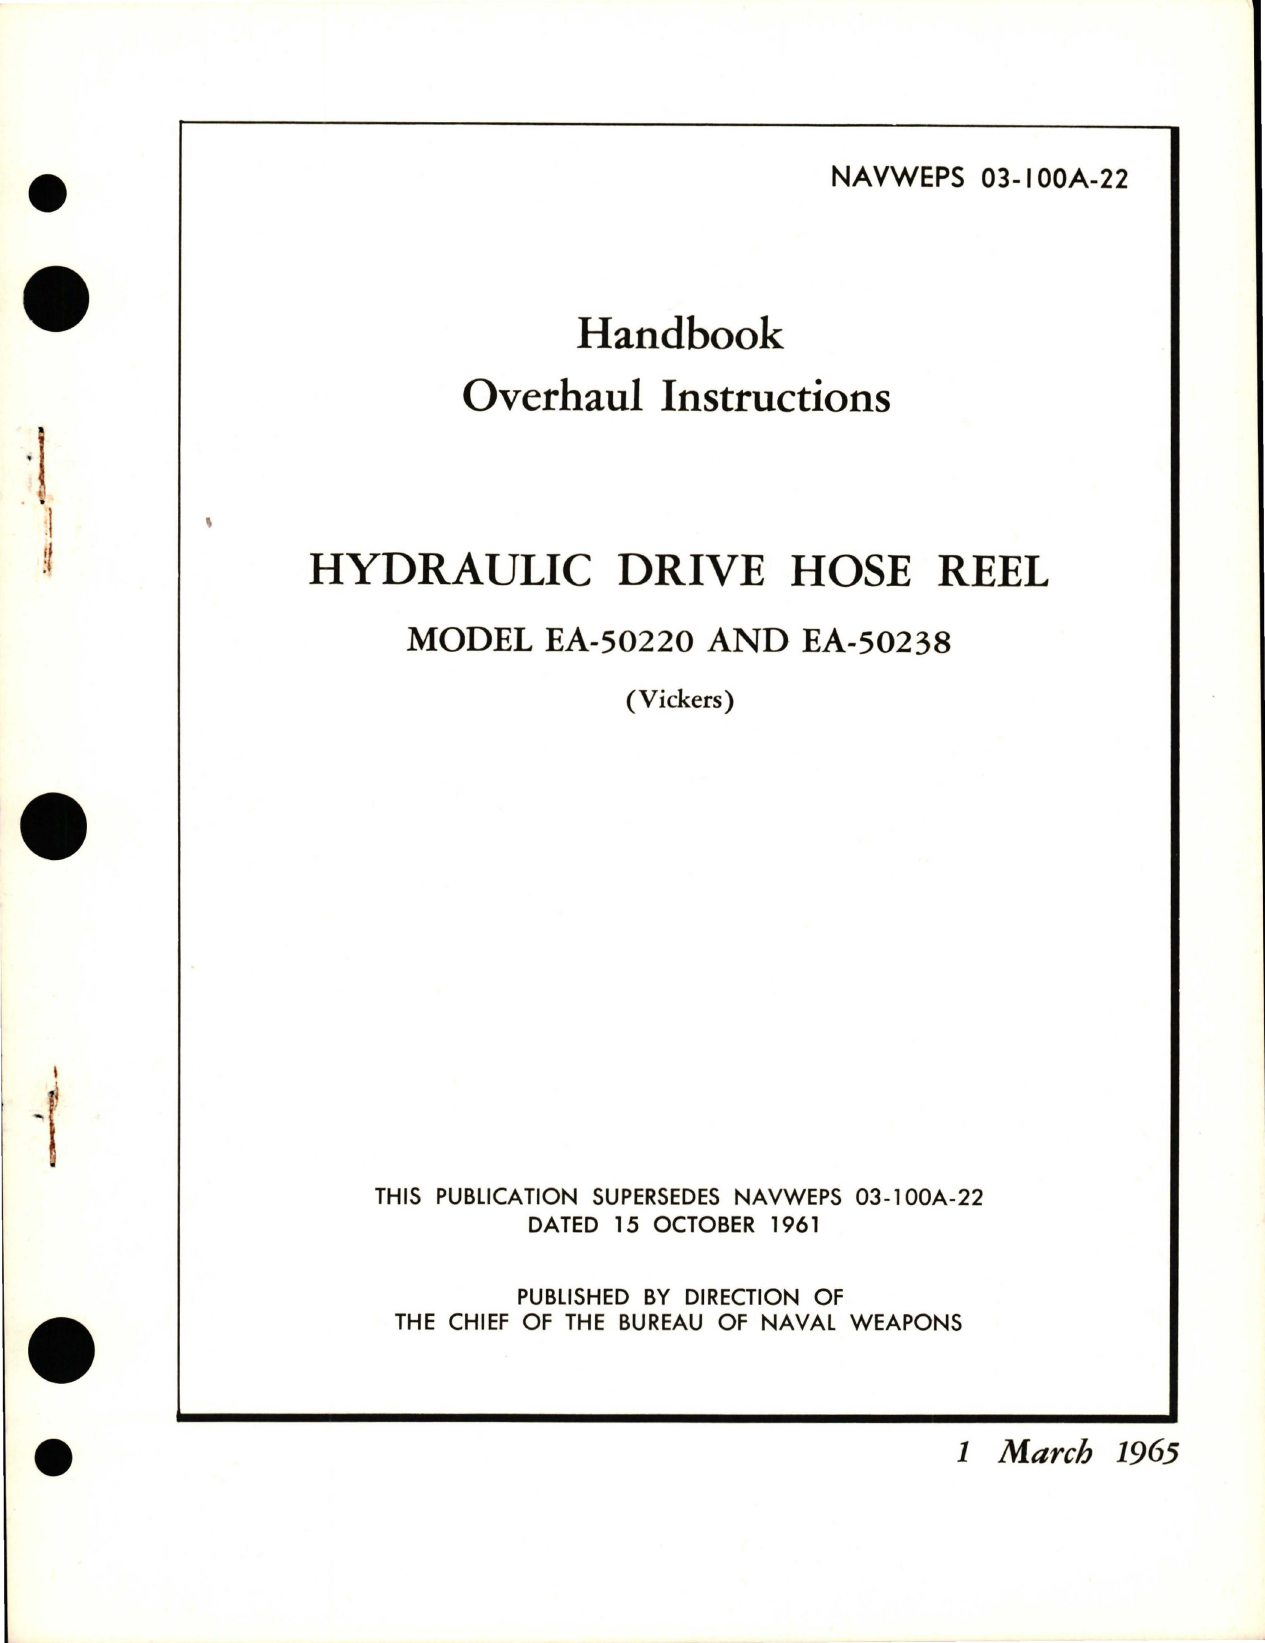 Sample page 1 from AirCorps Library document: Overhaul Instructions for Hydraulic Drive Hose Reel - Model EA-50220, EA-50238 